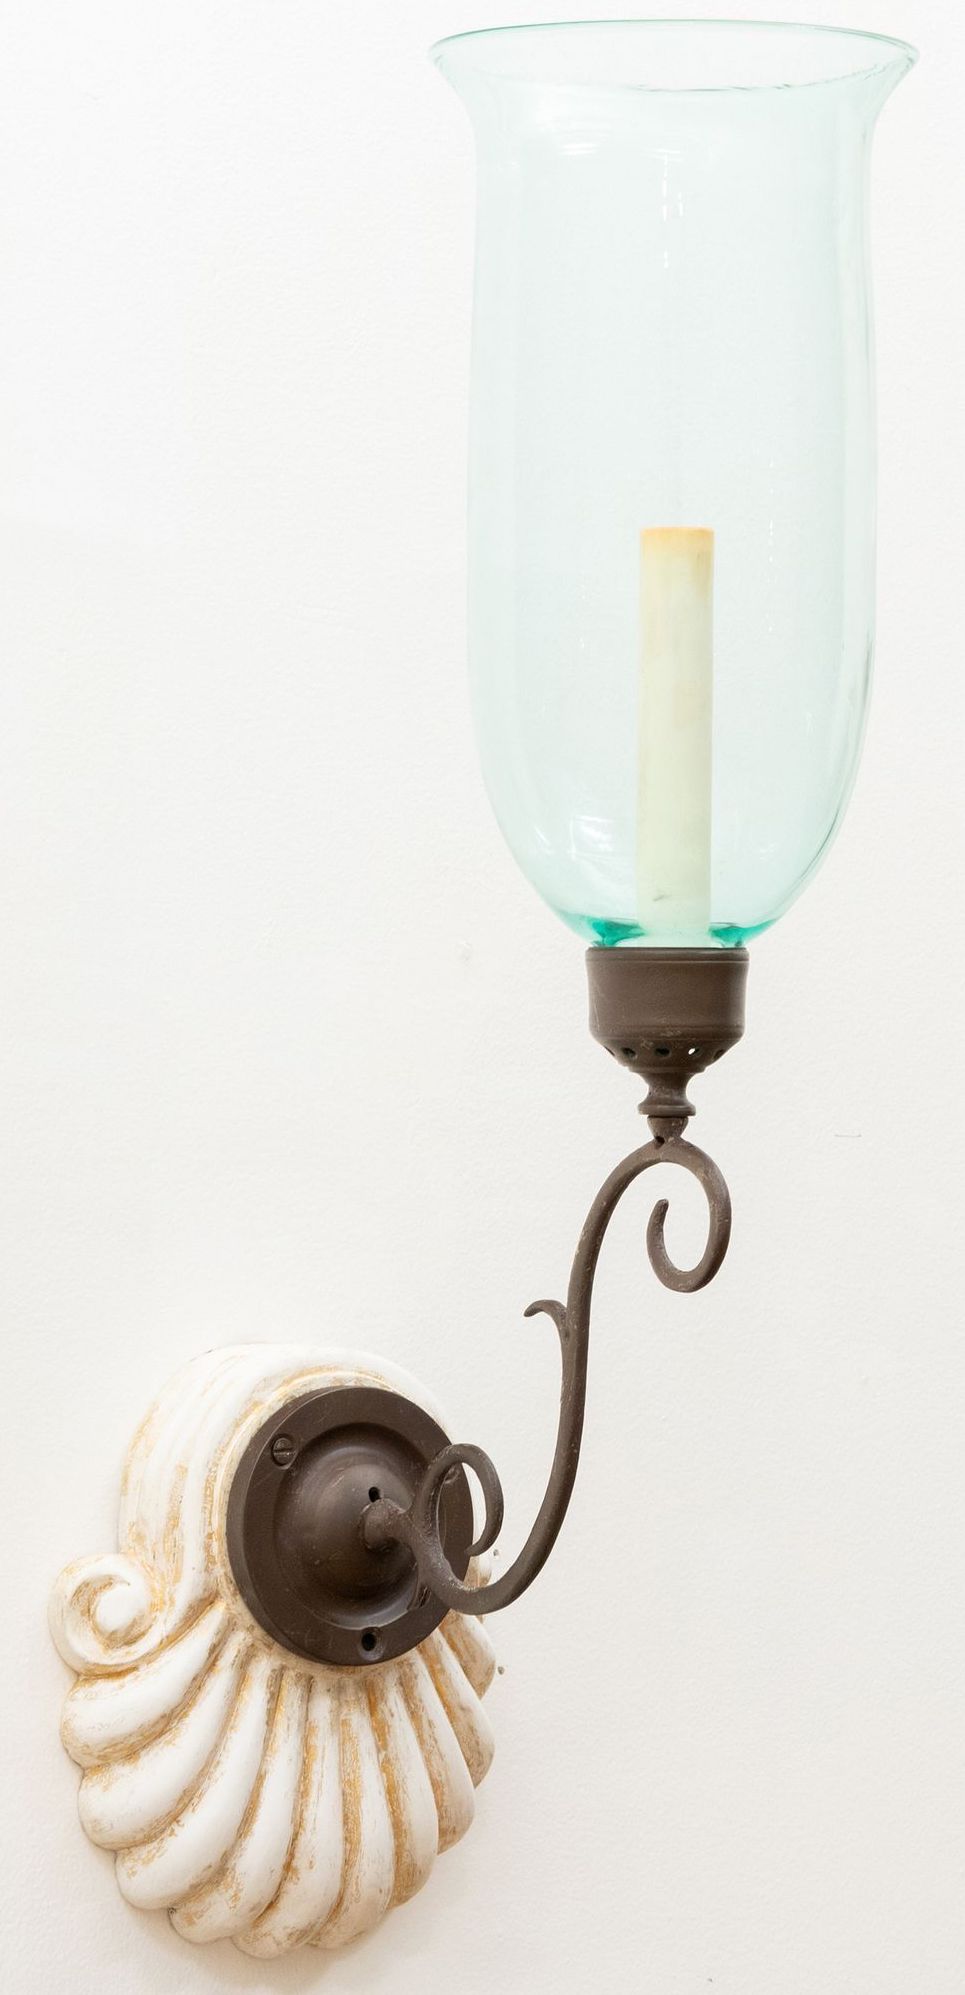 shell sconces won at auction